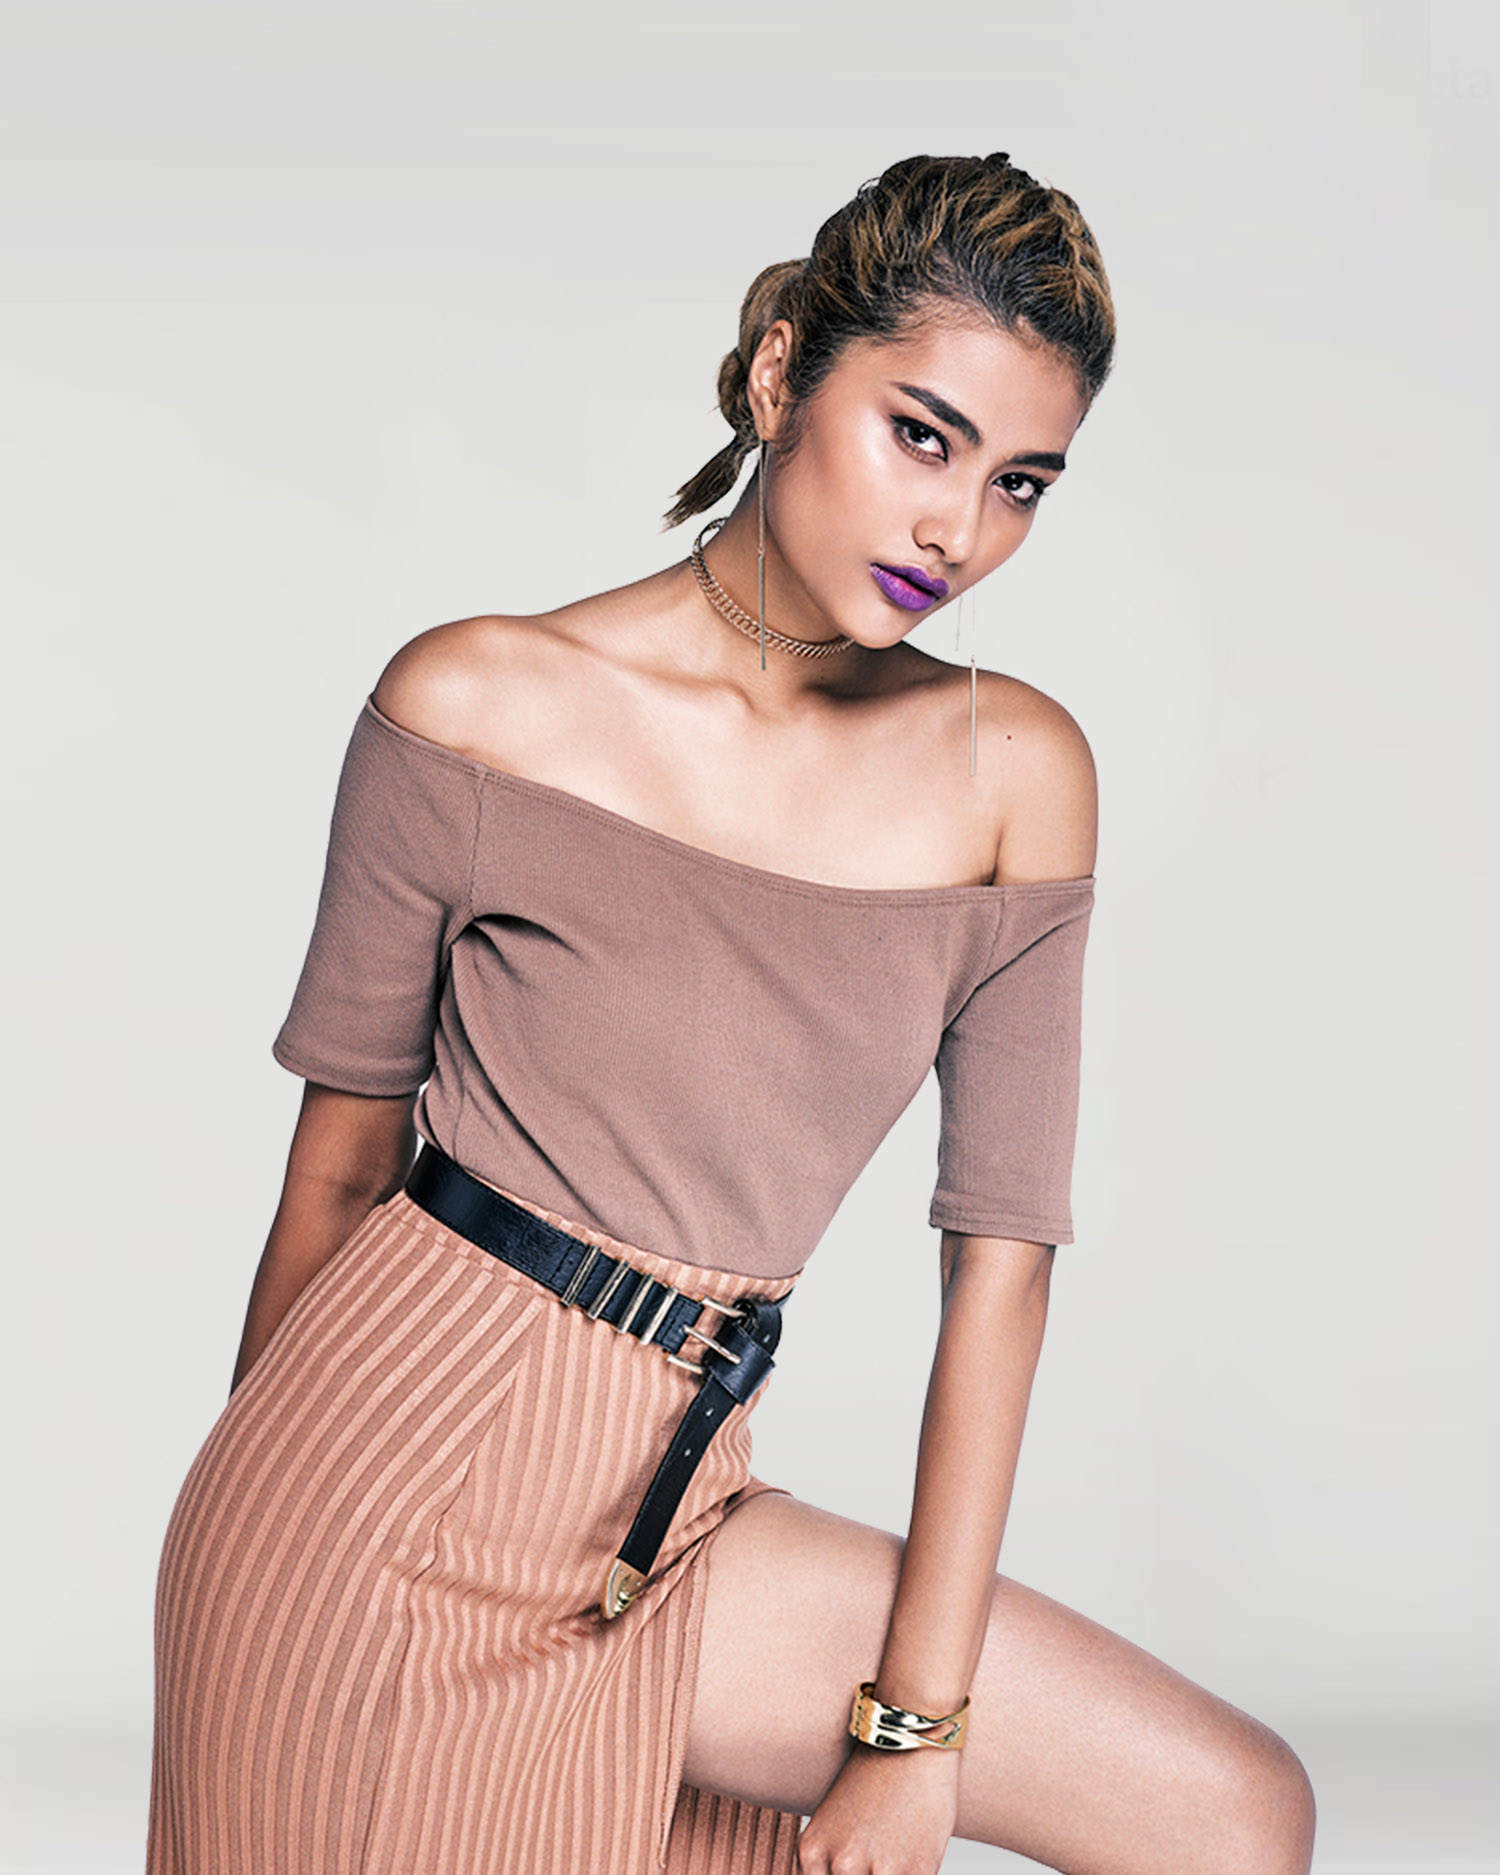 #AsNTM5: What We Know About Malaysian Contestants - Alicia Amin